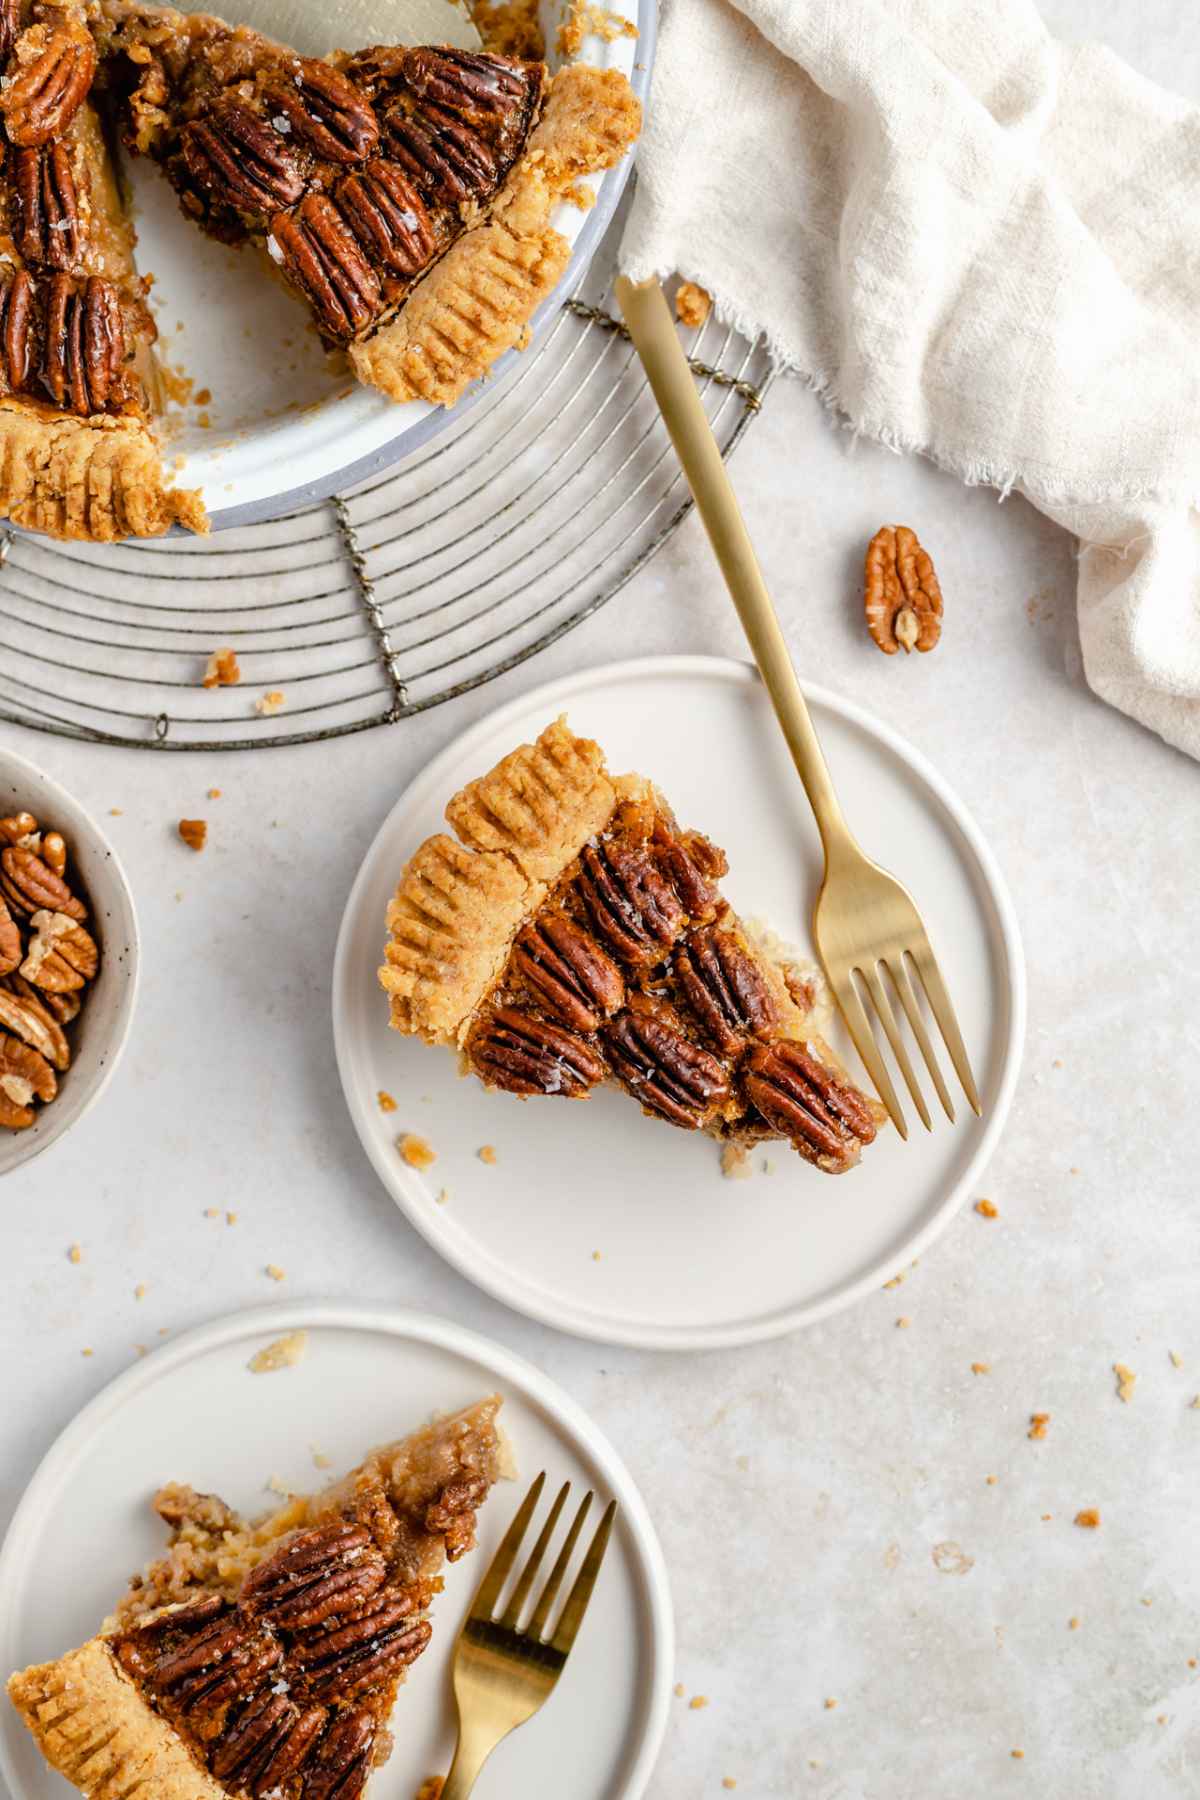 Slices of pie topped with pecans on white plates.